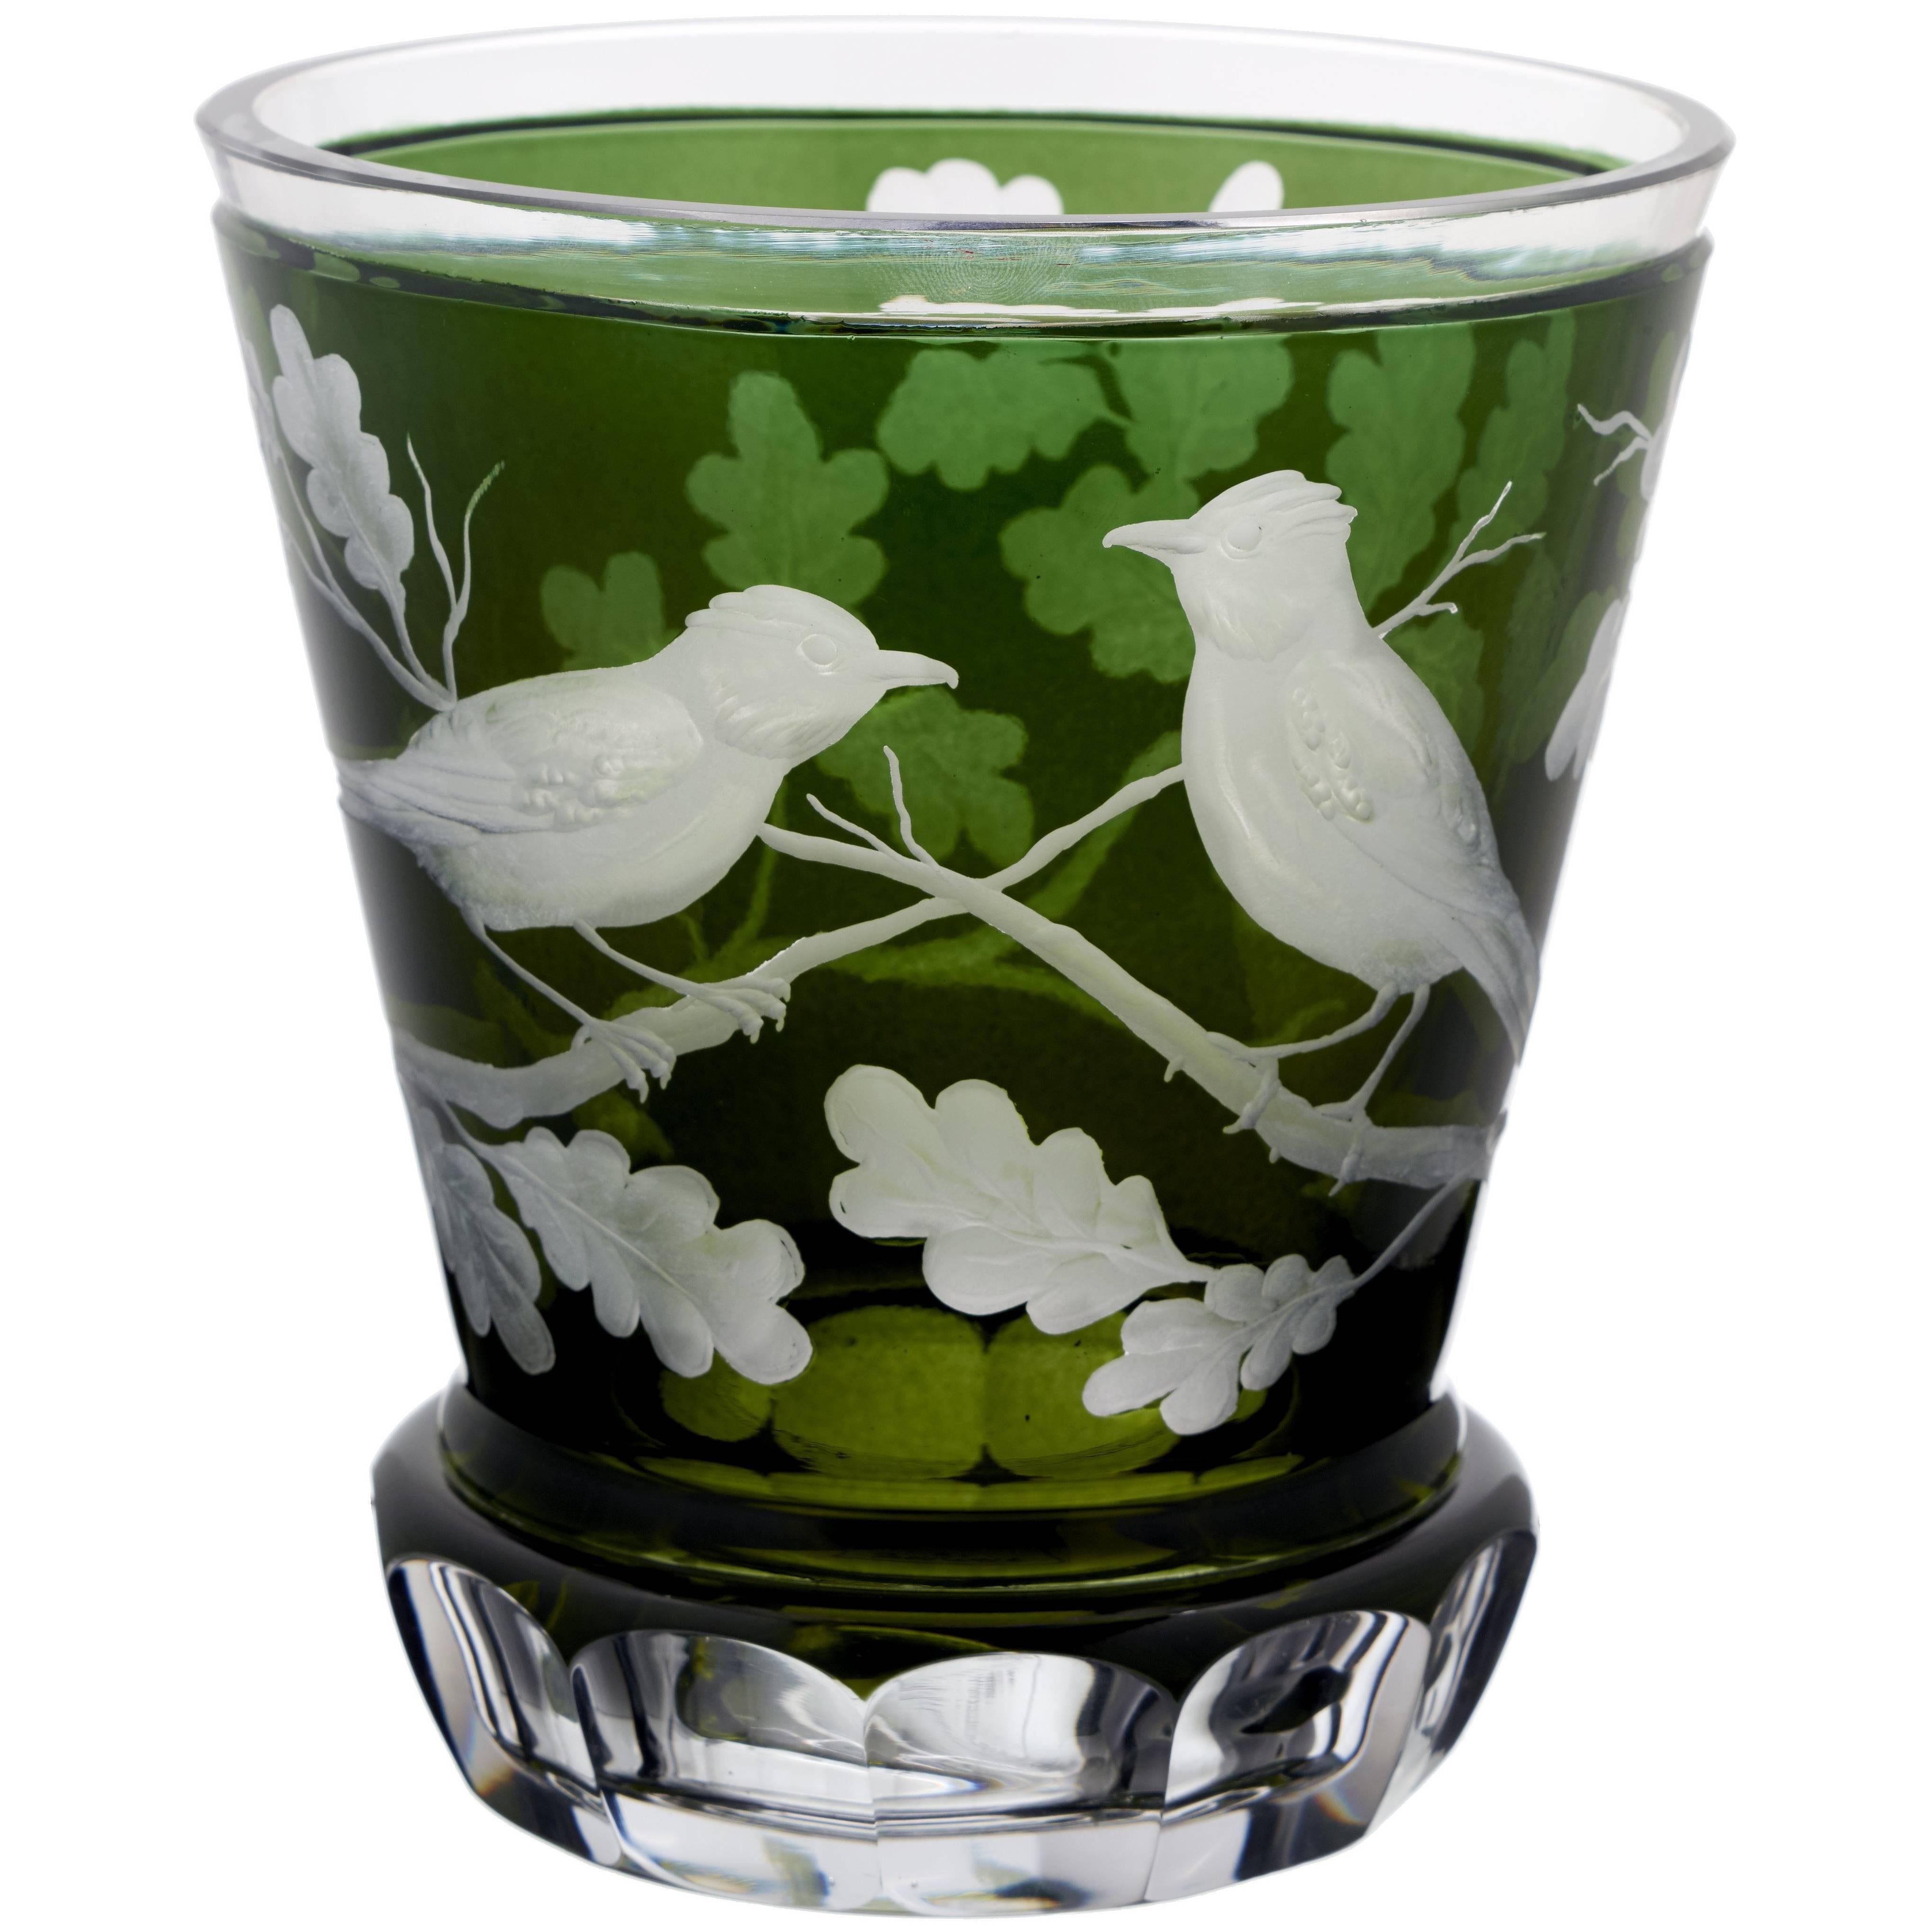 Country Style Crystal Vase Green Glass Birds Decor Sofina Boutique Kitzbuehel For Sale